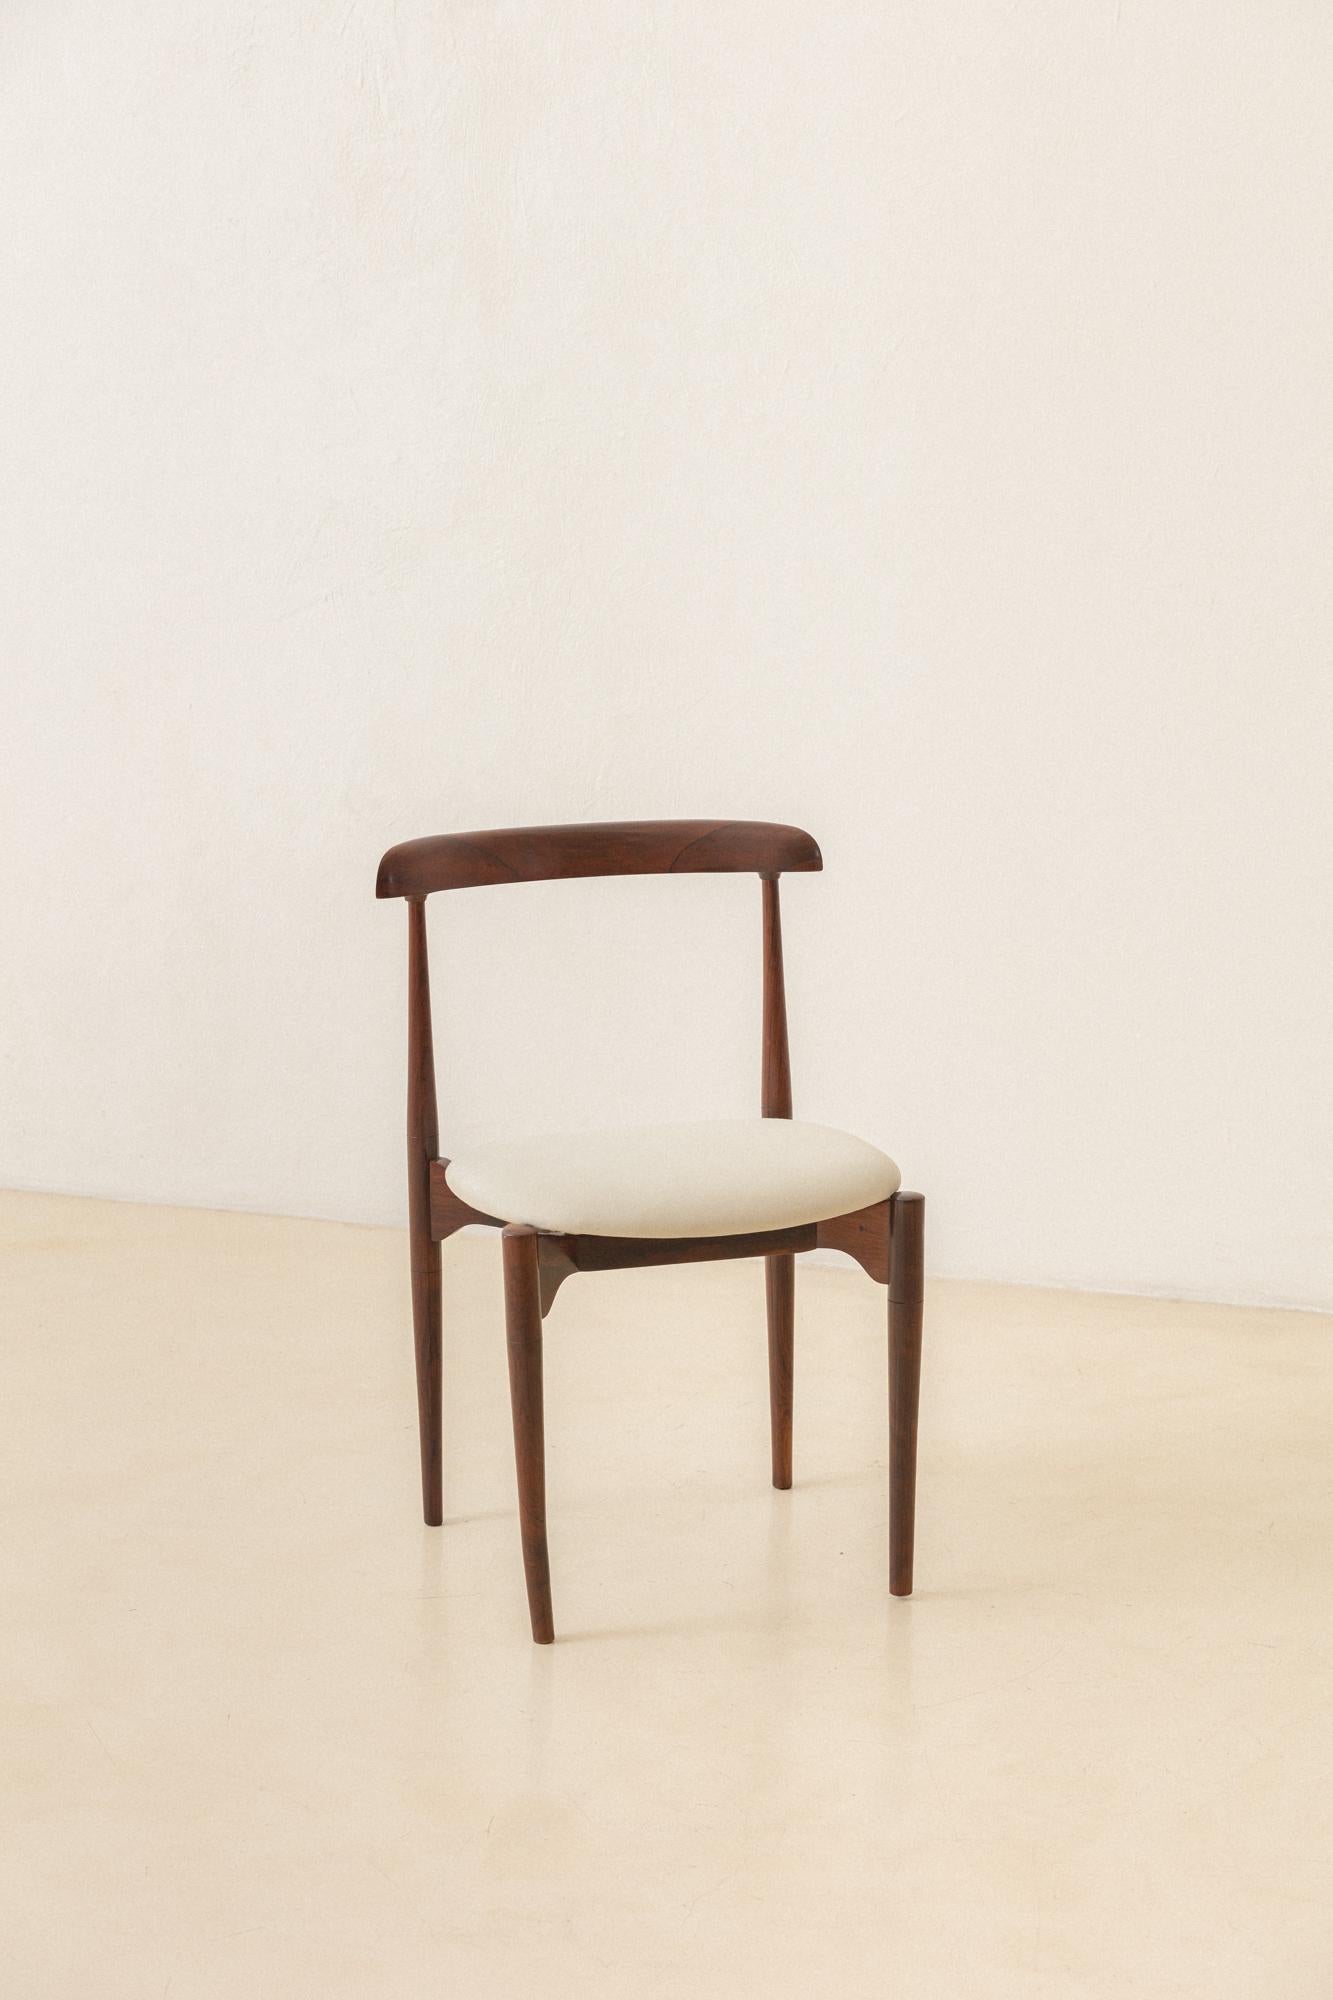 This charming chair in solid rosewood was designed by the Italian-born furniture designer Carlo Benvenuto Fongaro (1915-1986) in the 1950s.
 
Fongaro collaborated in developing the first experiences in office furniture with modern, simple, and